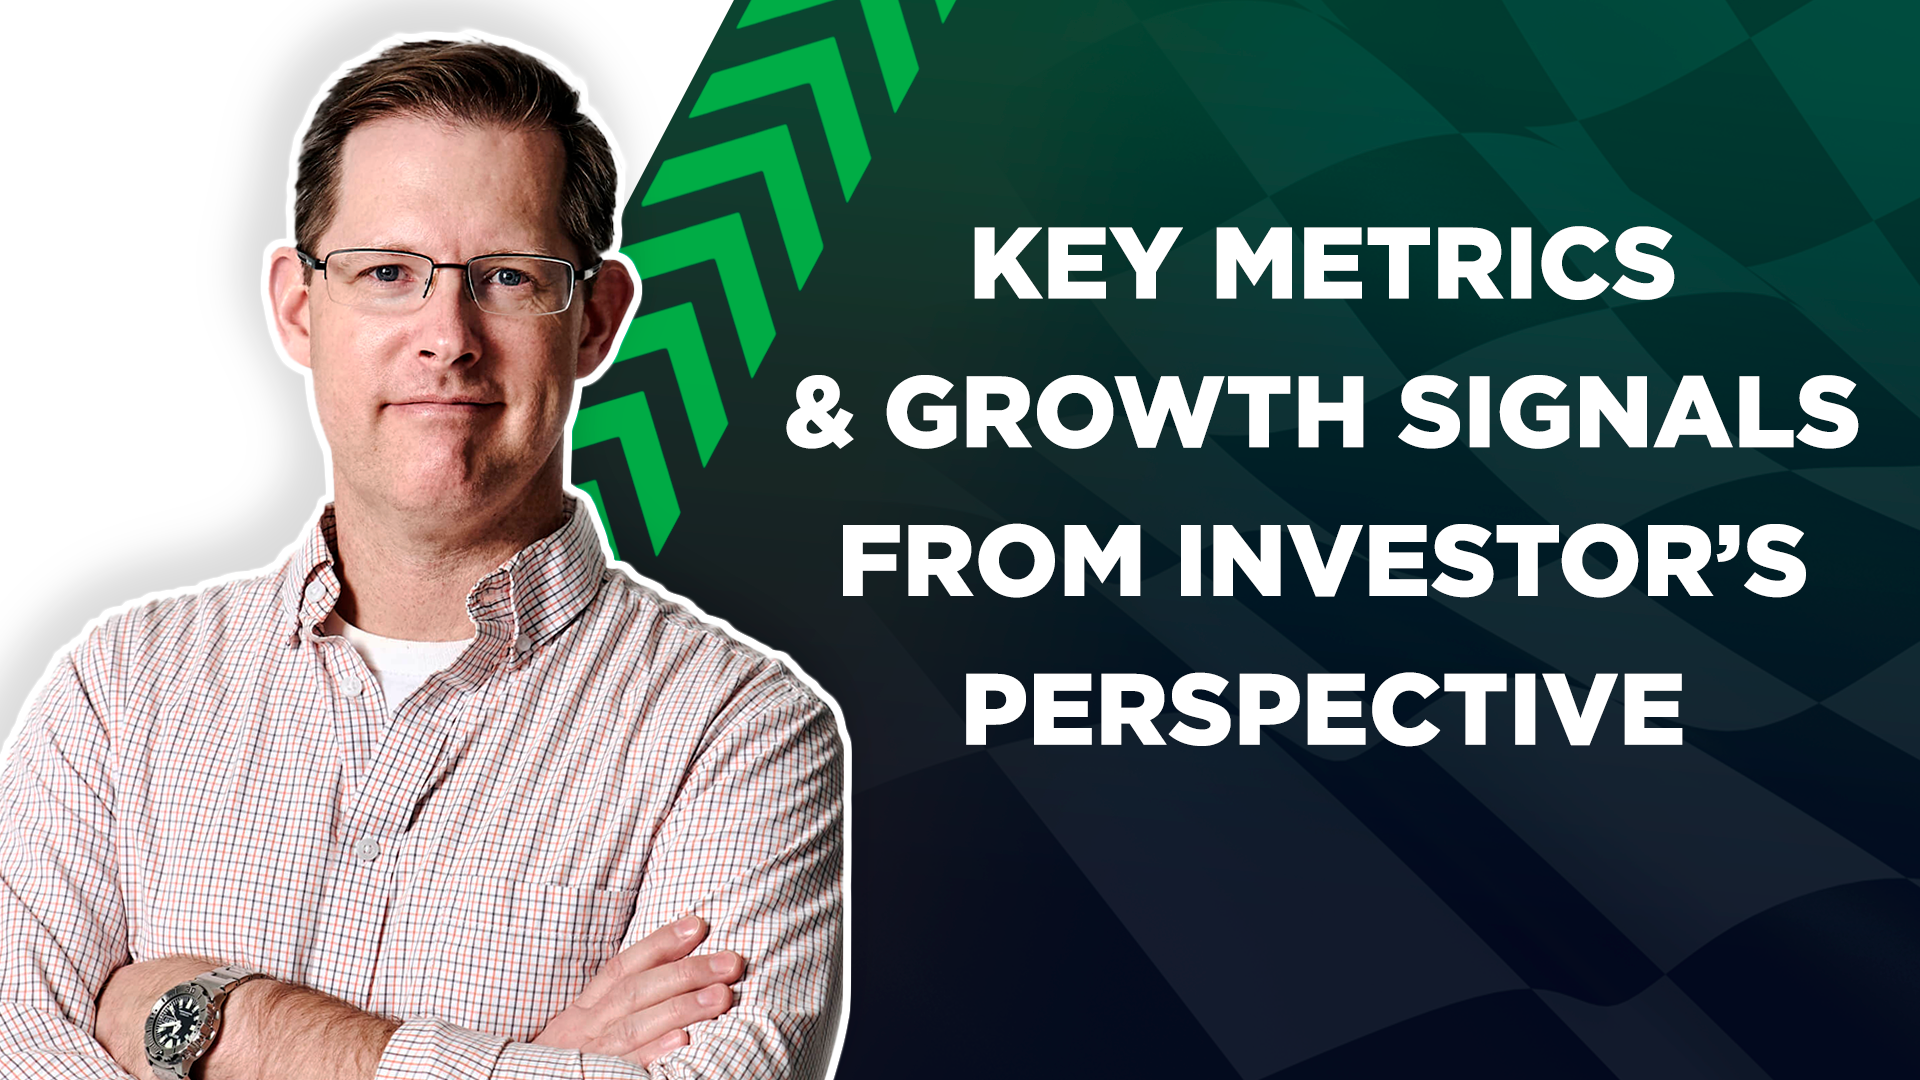 Podcast Pit Stop: Brad Bentz on Key Metrics & Growth Signals From Investor’s Perspective